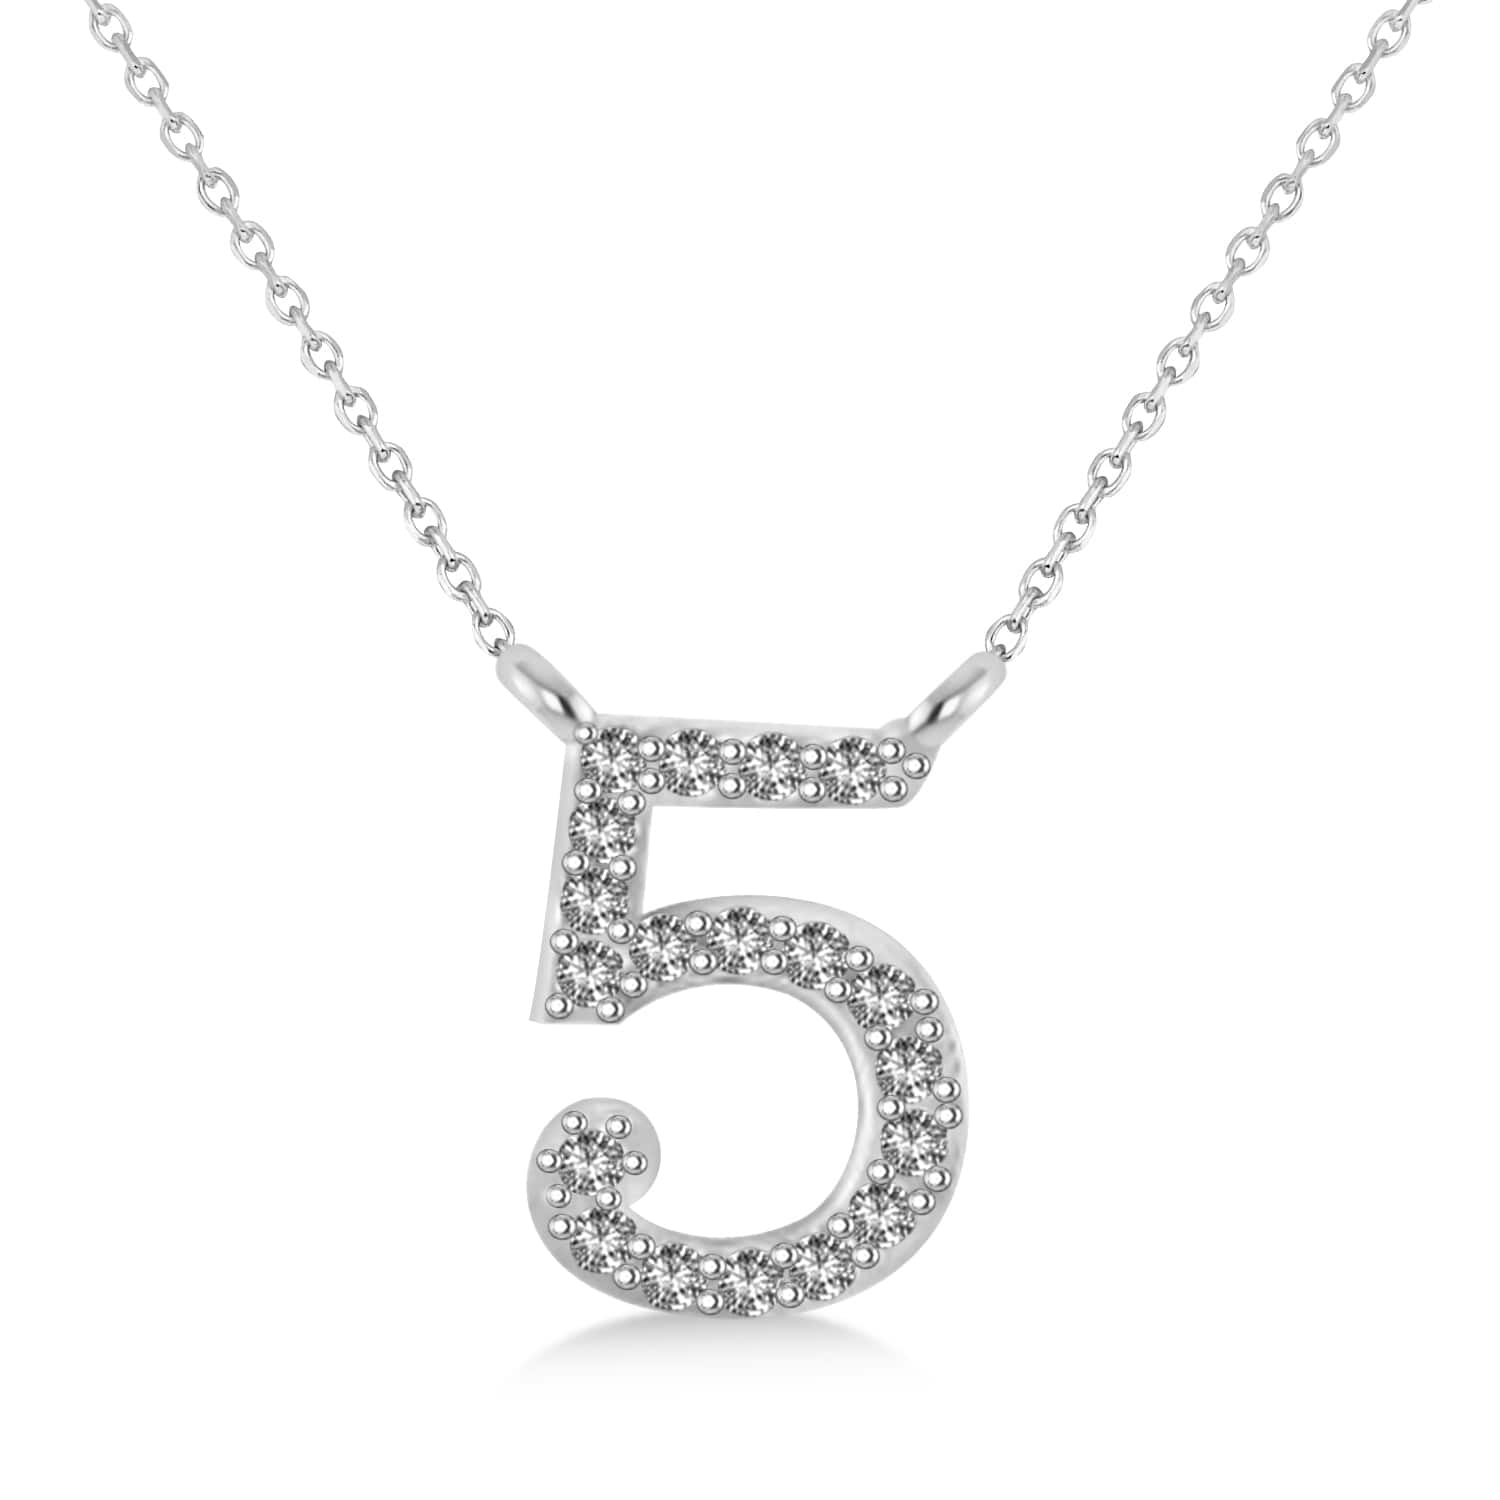 Diamond Personalized Number Pendant Necklace 14k White Gold